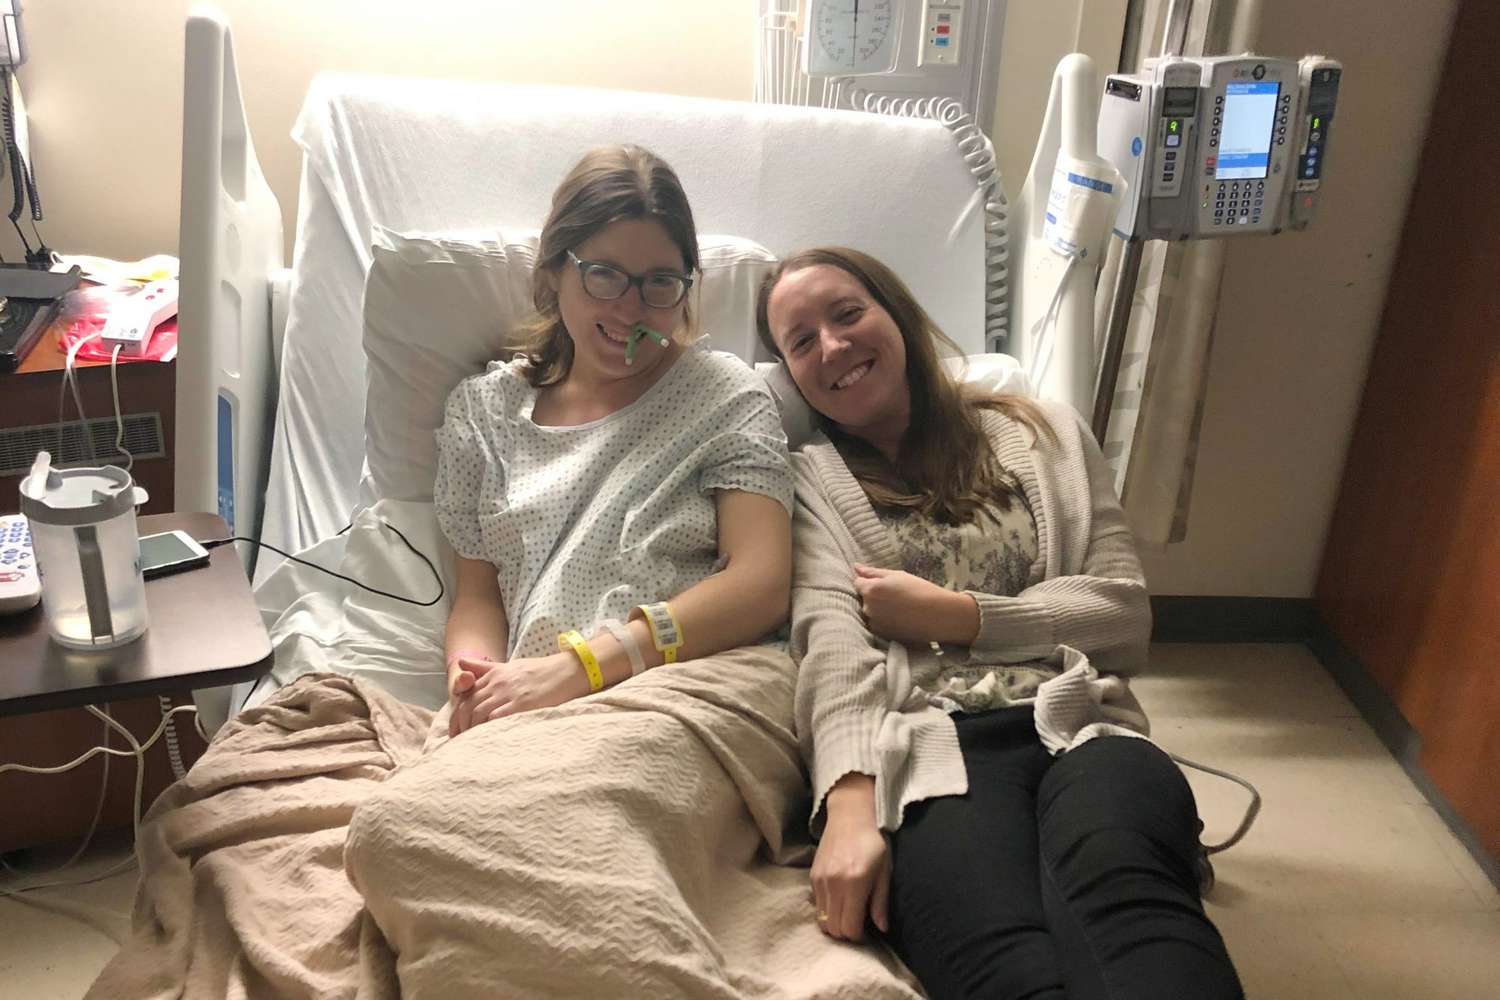 Ashlea Betzen-Miyauchi and Sarina Finkelstein-Leventi on October 19, 2019. Ashlea had just been admitted back into the hospital two days before for complications related to metastatic breast cancer.